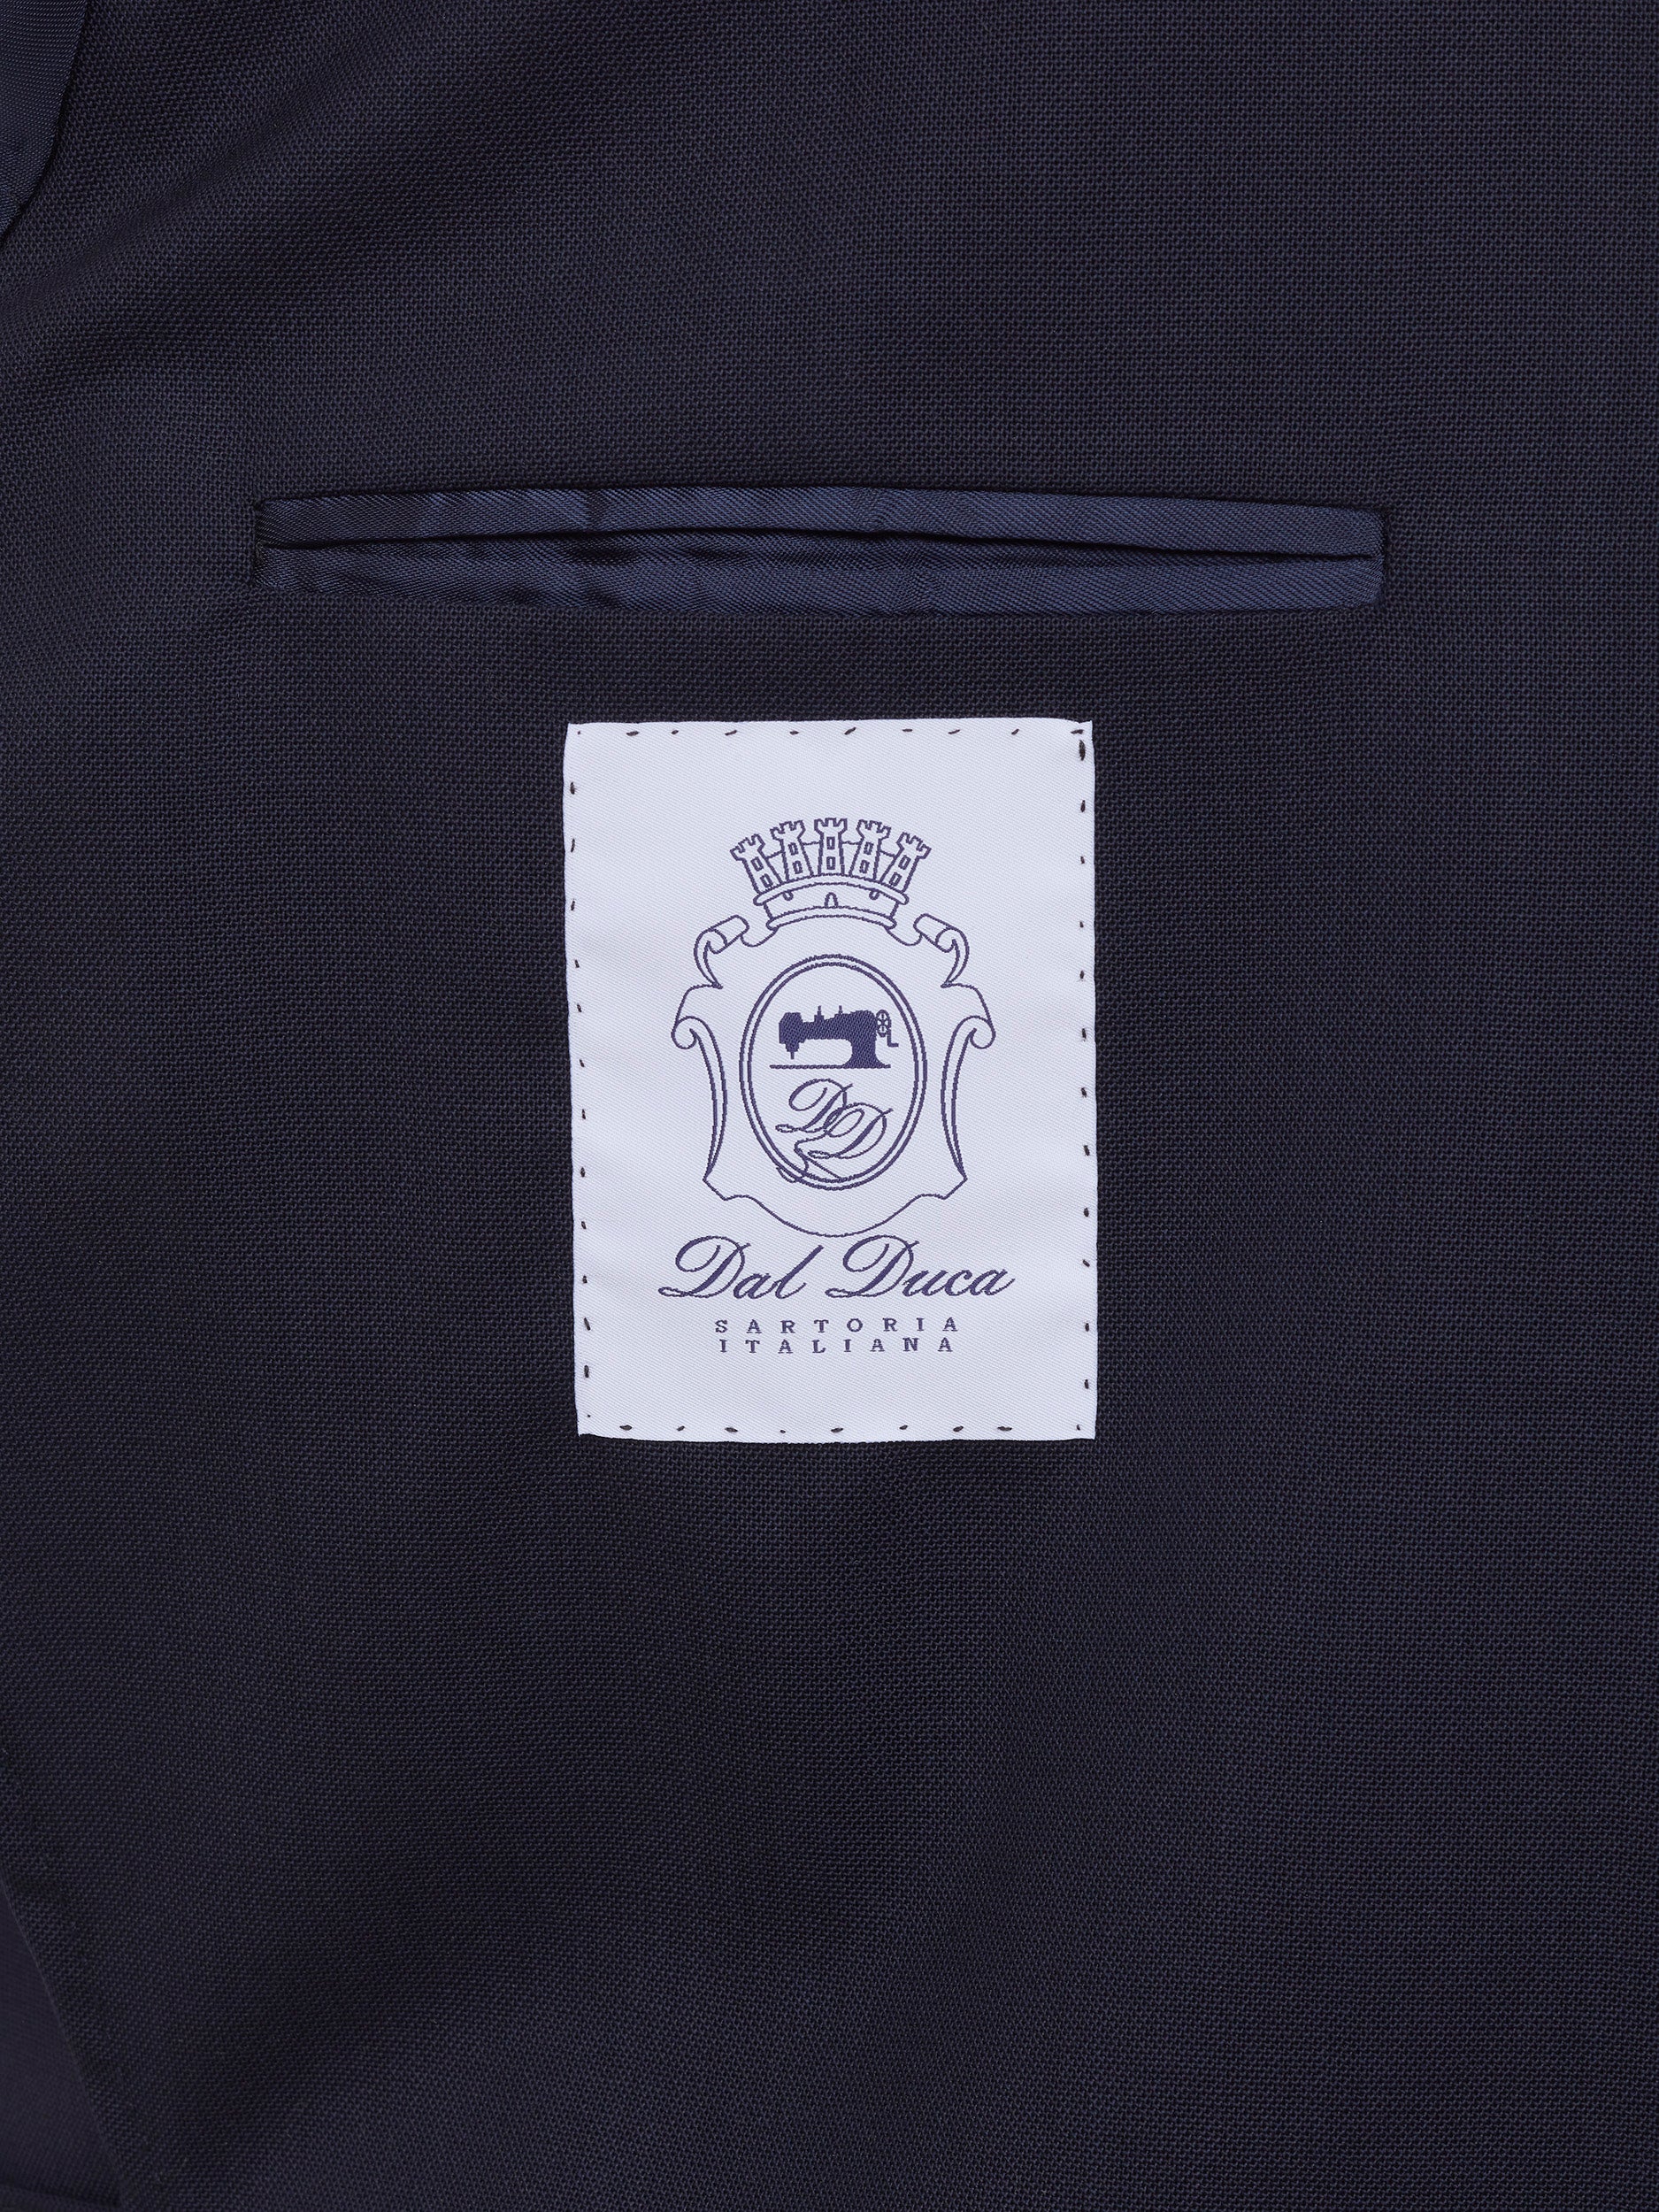 Navy 2-Ply traveller Suit